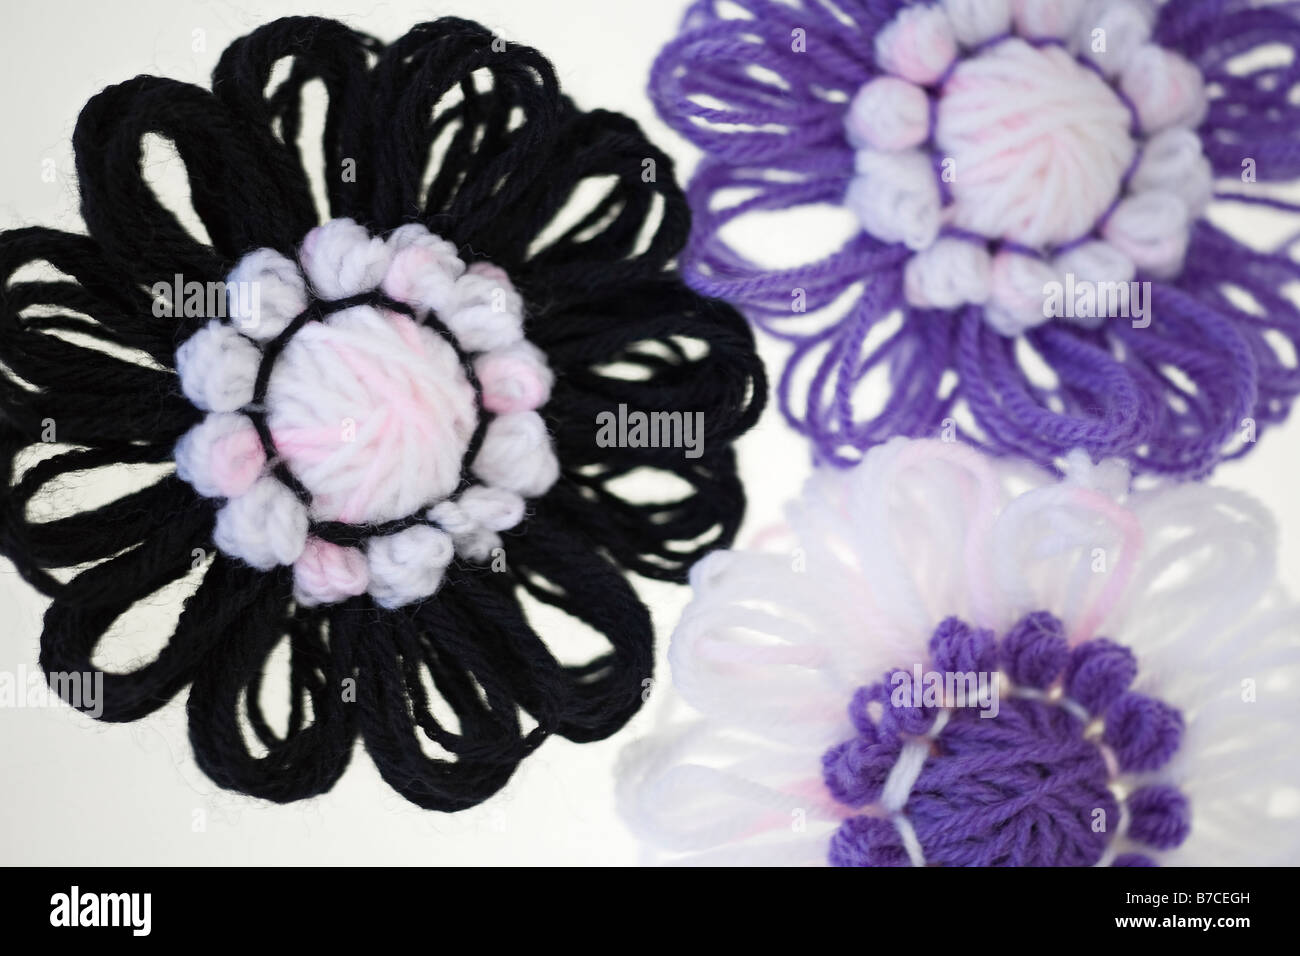 Knitted flowers produced by flower loom Stock Photo